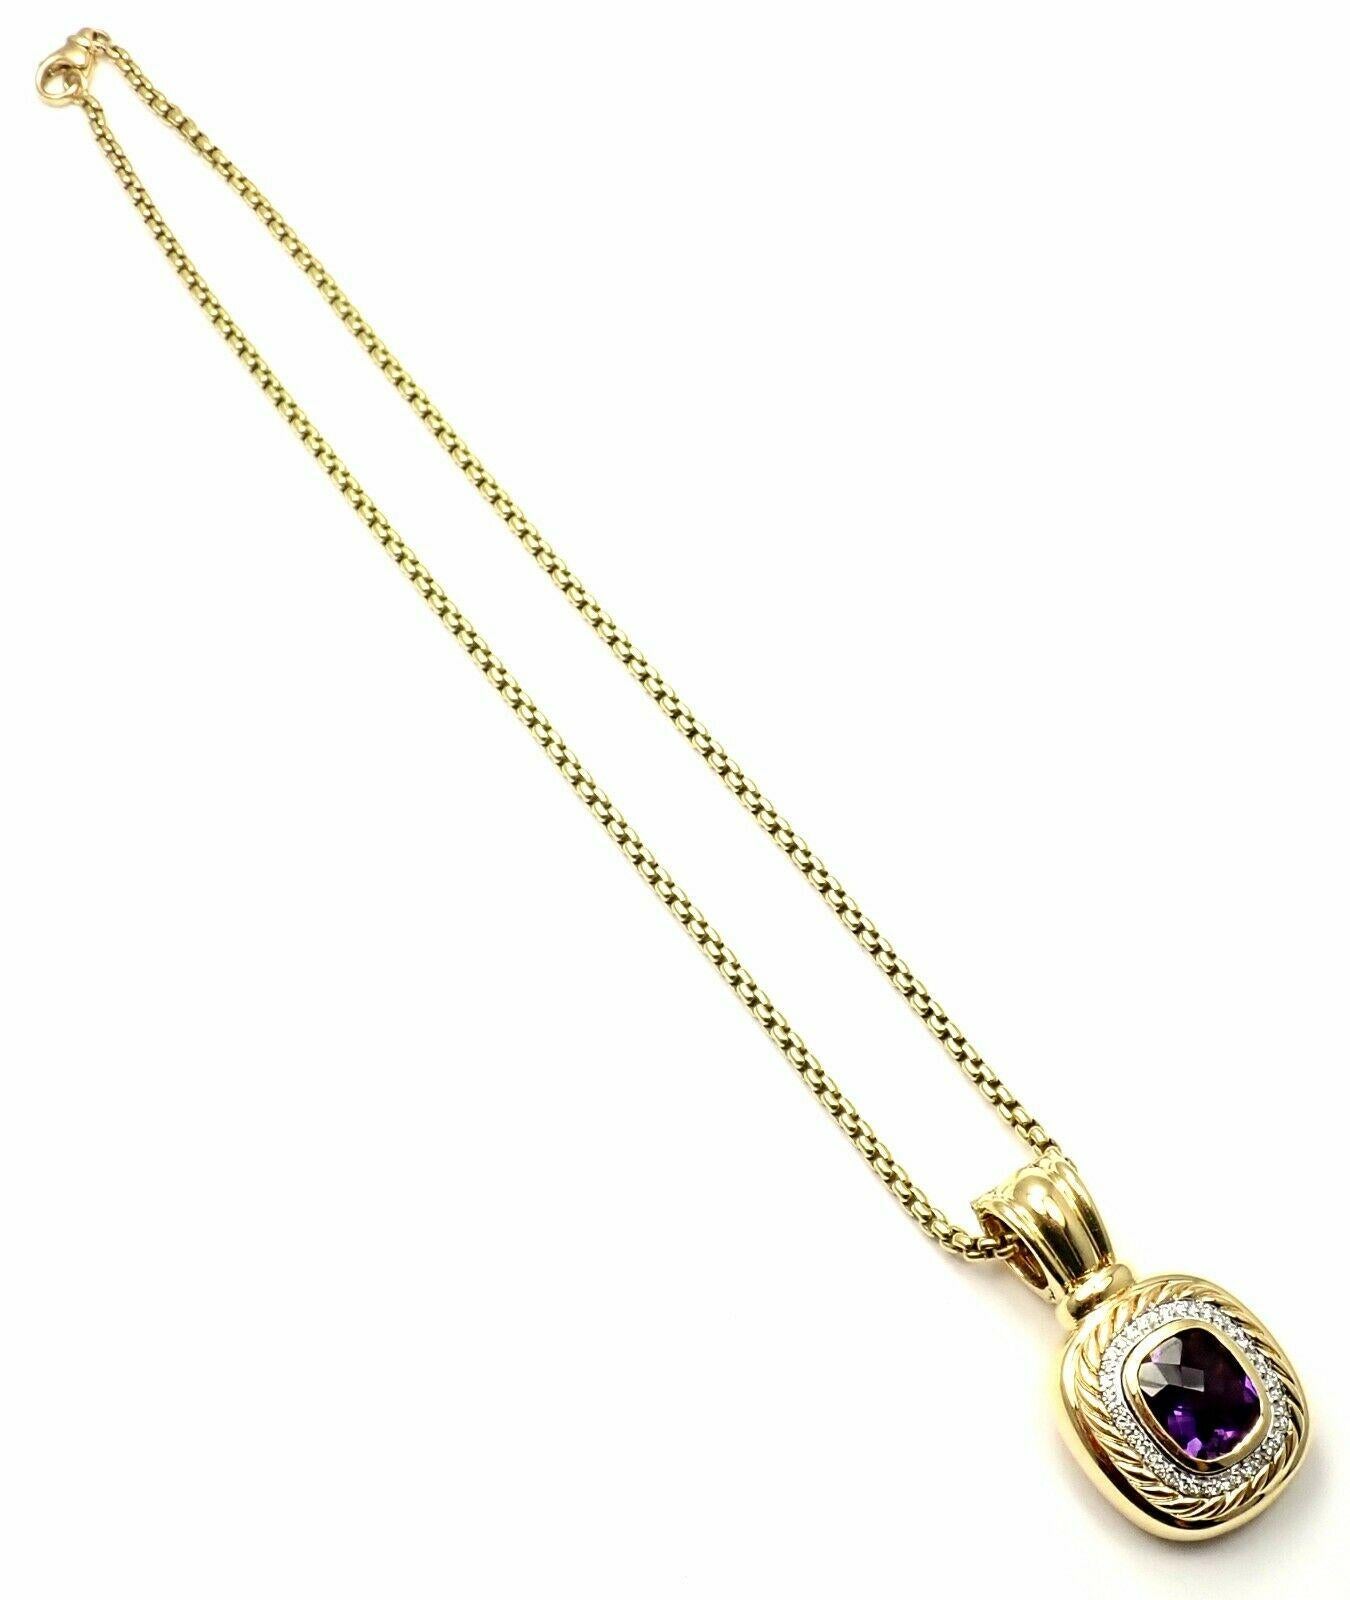 David Yurman Diamond Amethyst Large Cable Pendant Chain Yellow Gold Necklace In Excellent Condition For Sale In Holland, PA